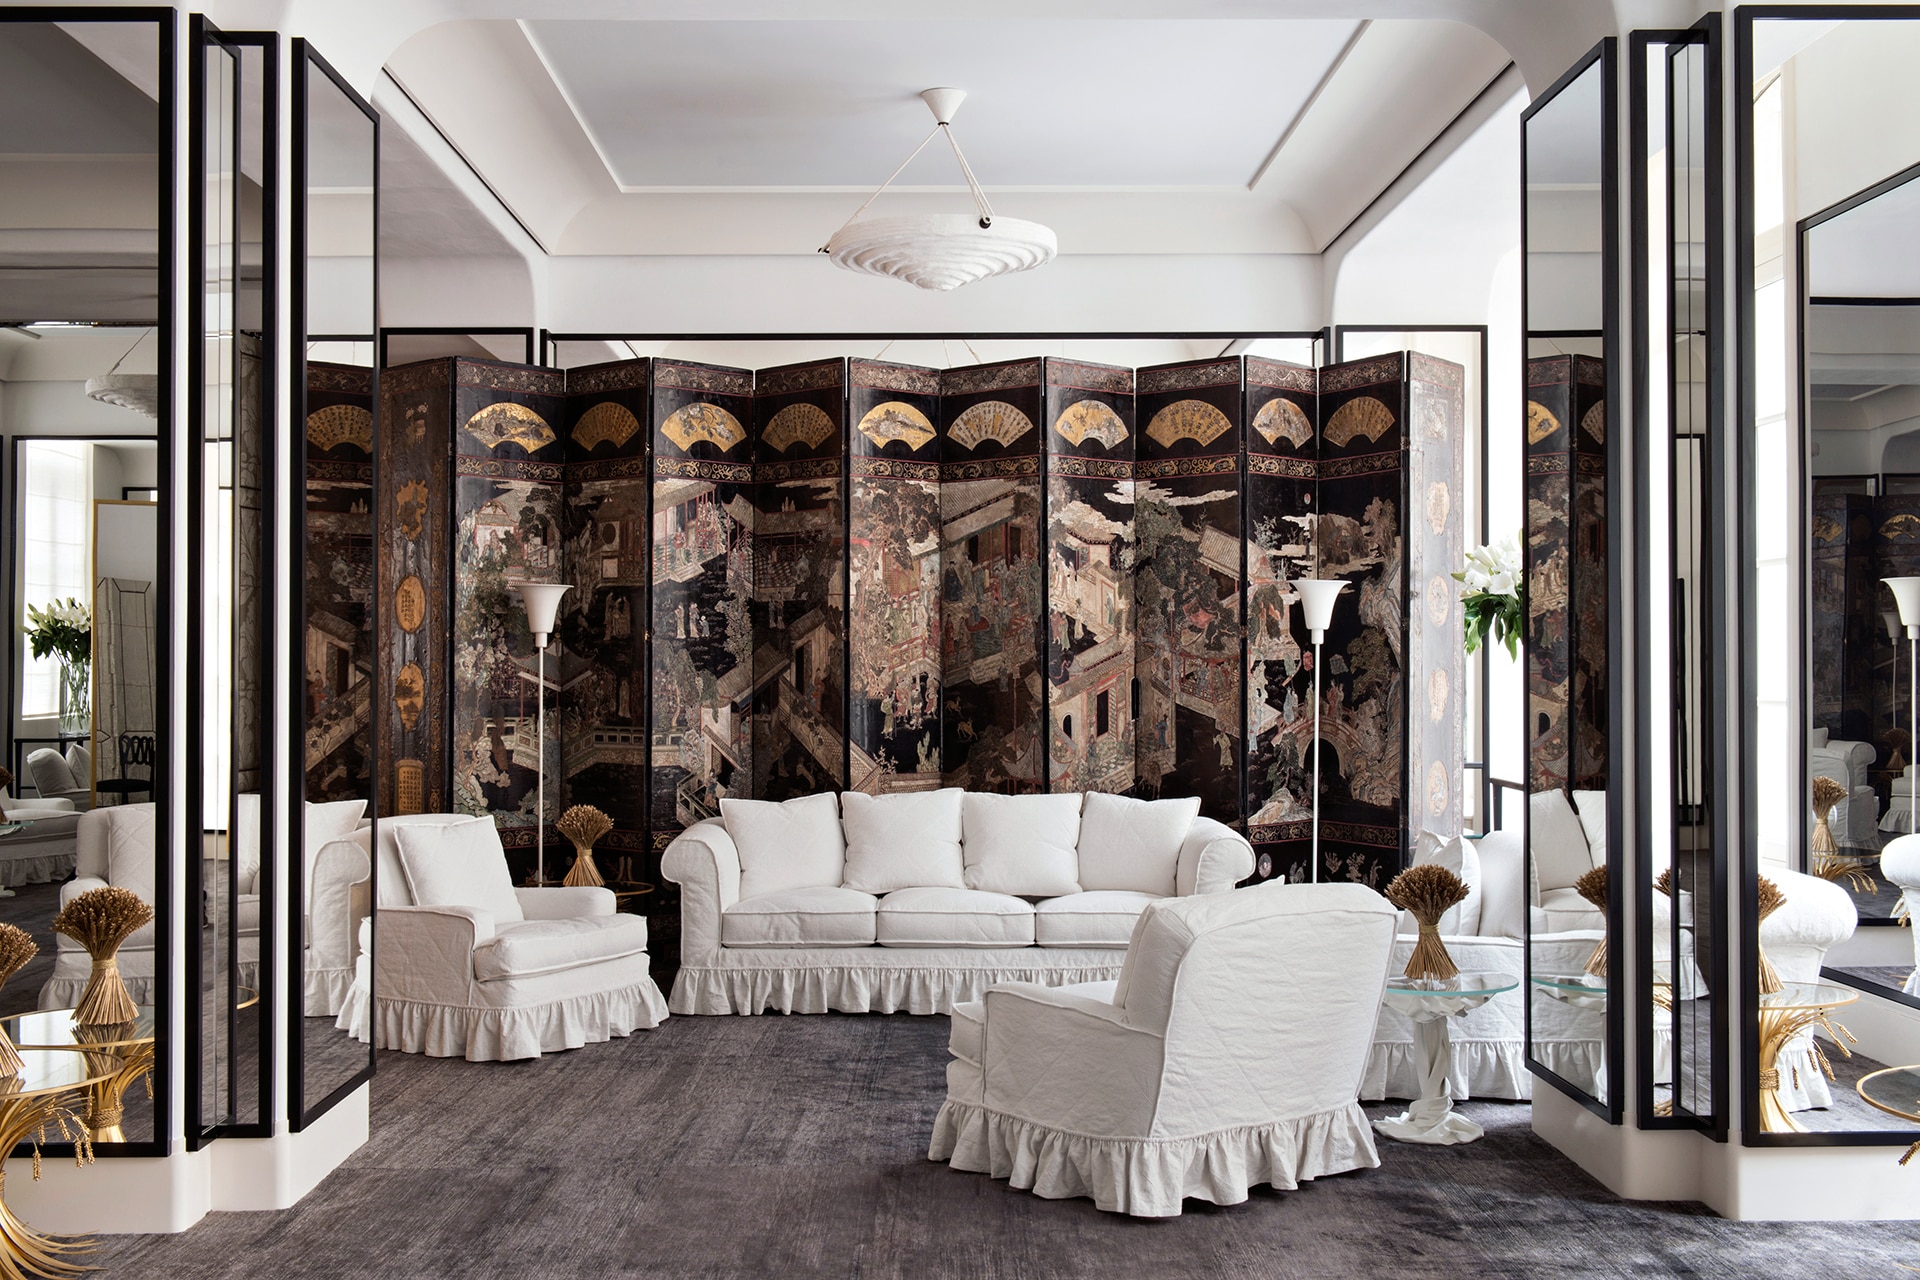 What haute couture clients can expect inside Chanel's newly redesigned salon